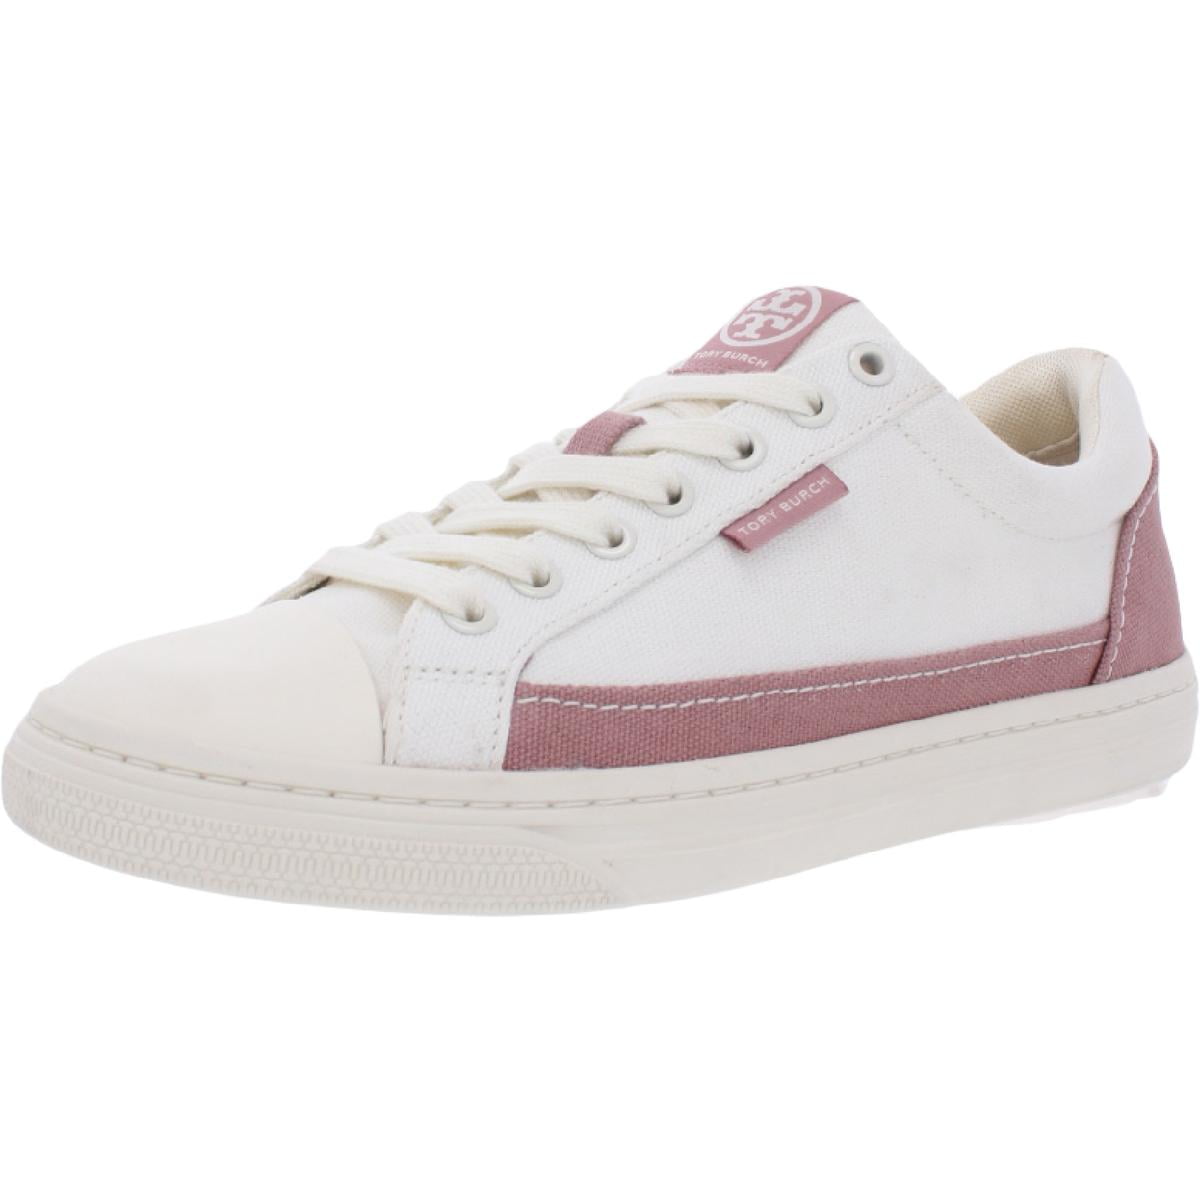 OBR WOMENS TRAINERS LACE UP PINK AND WHITE SIZES 3,4,5,6,7,8 AS SHOWN 